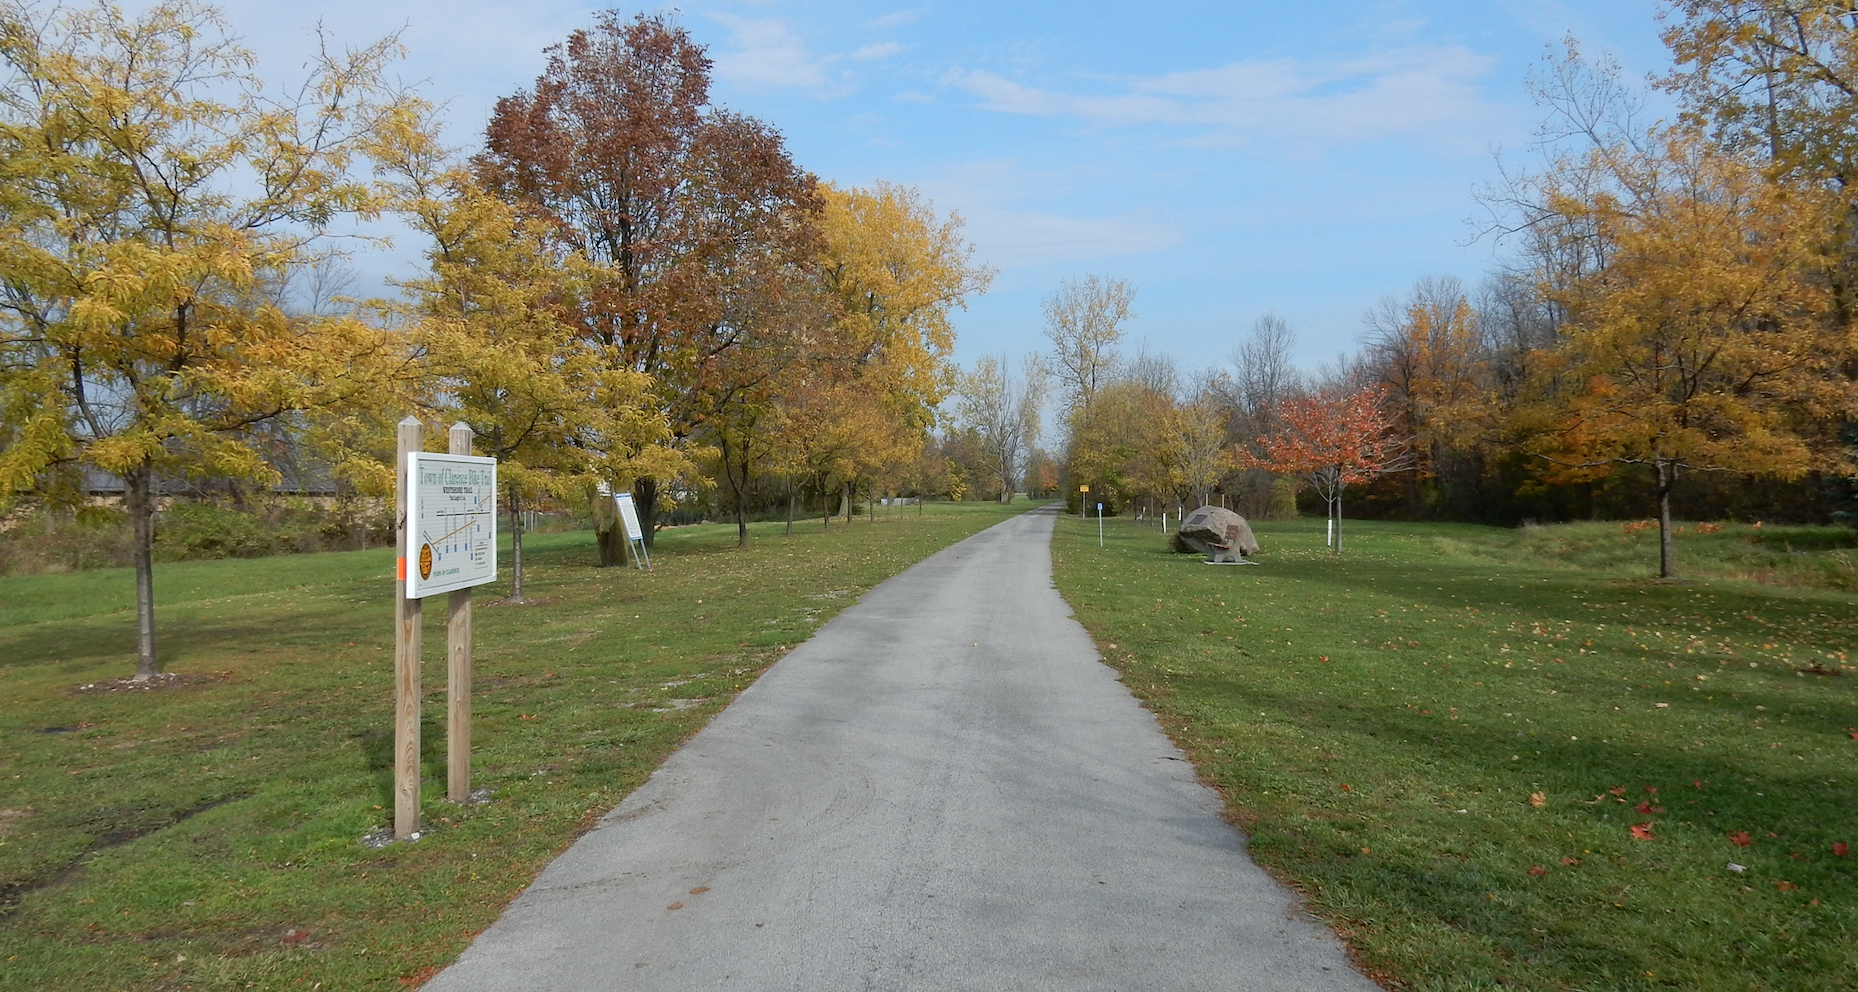 The Town of Clarence is continuing to build out its bike trail network.